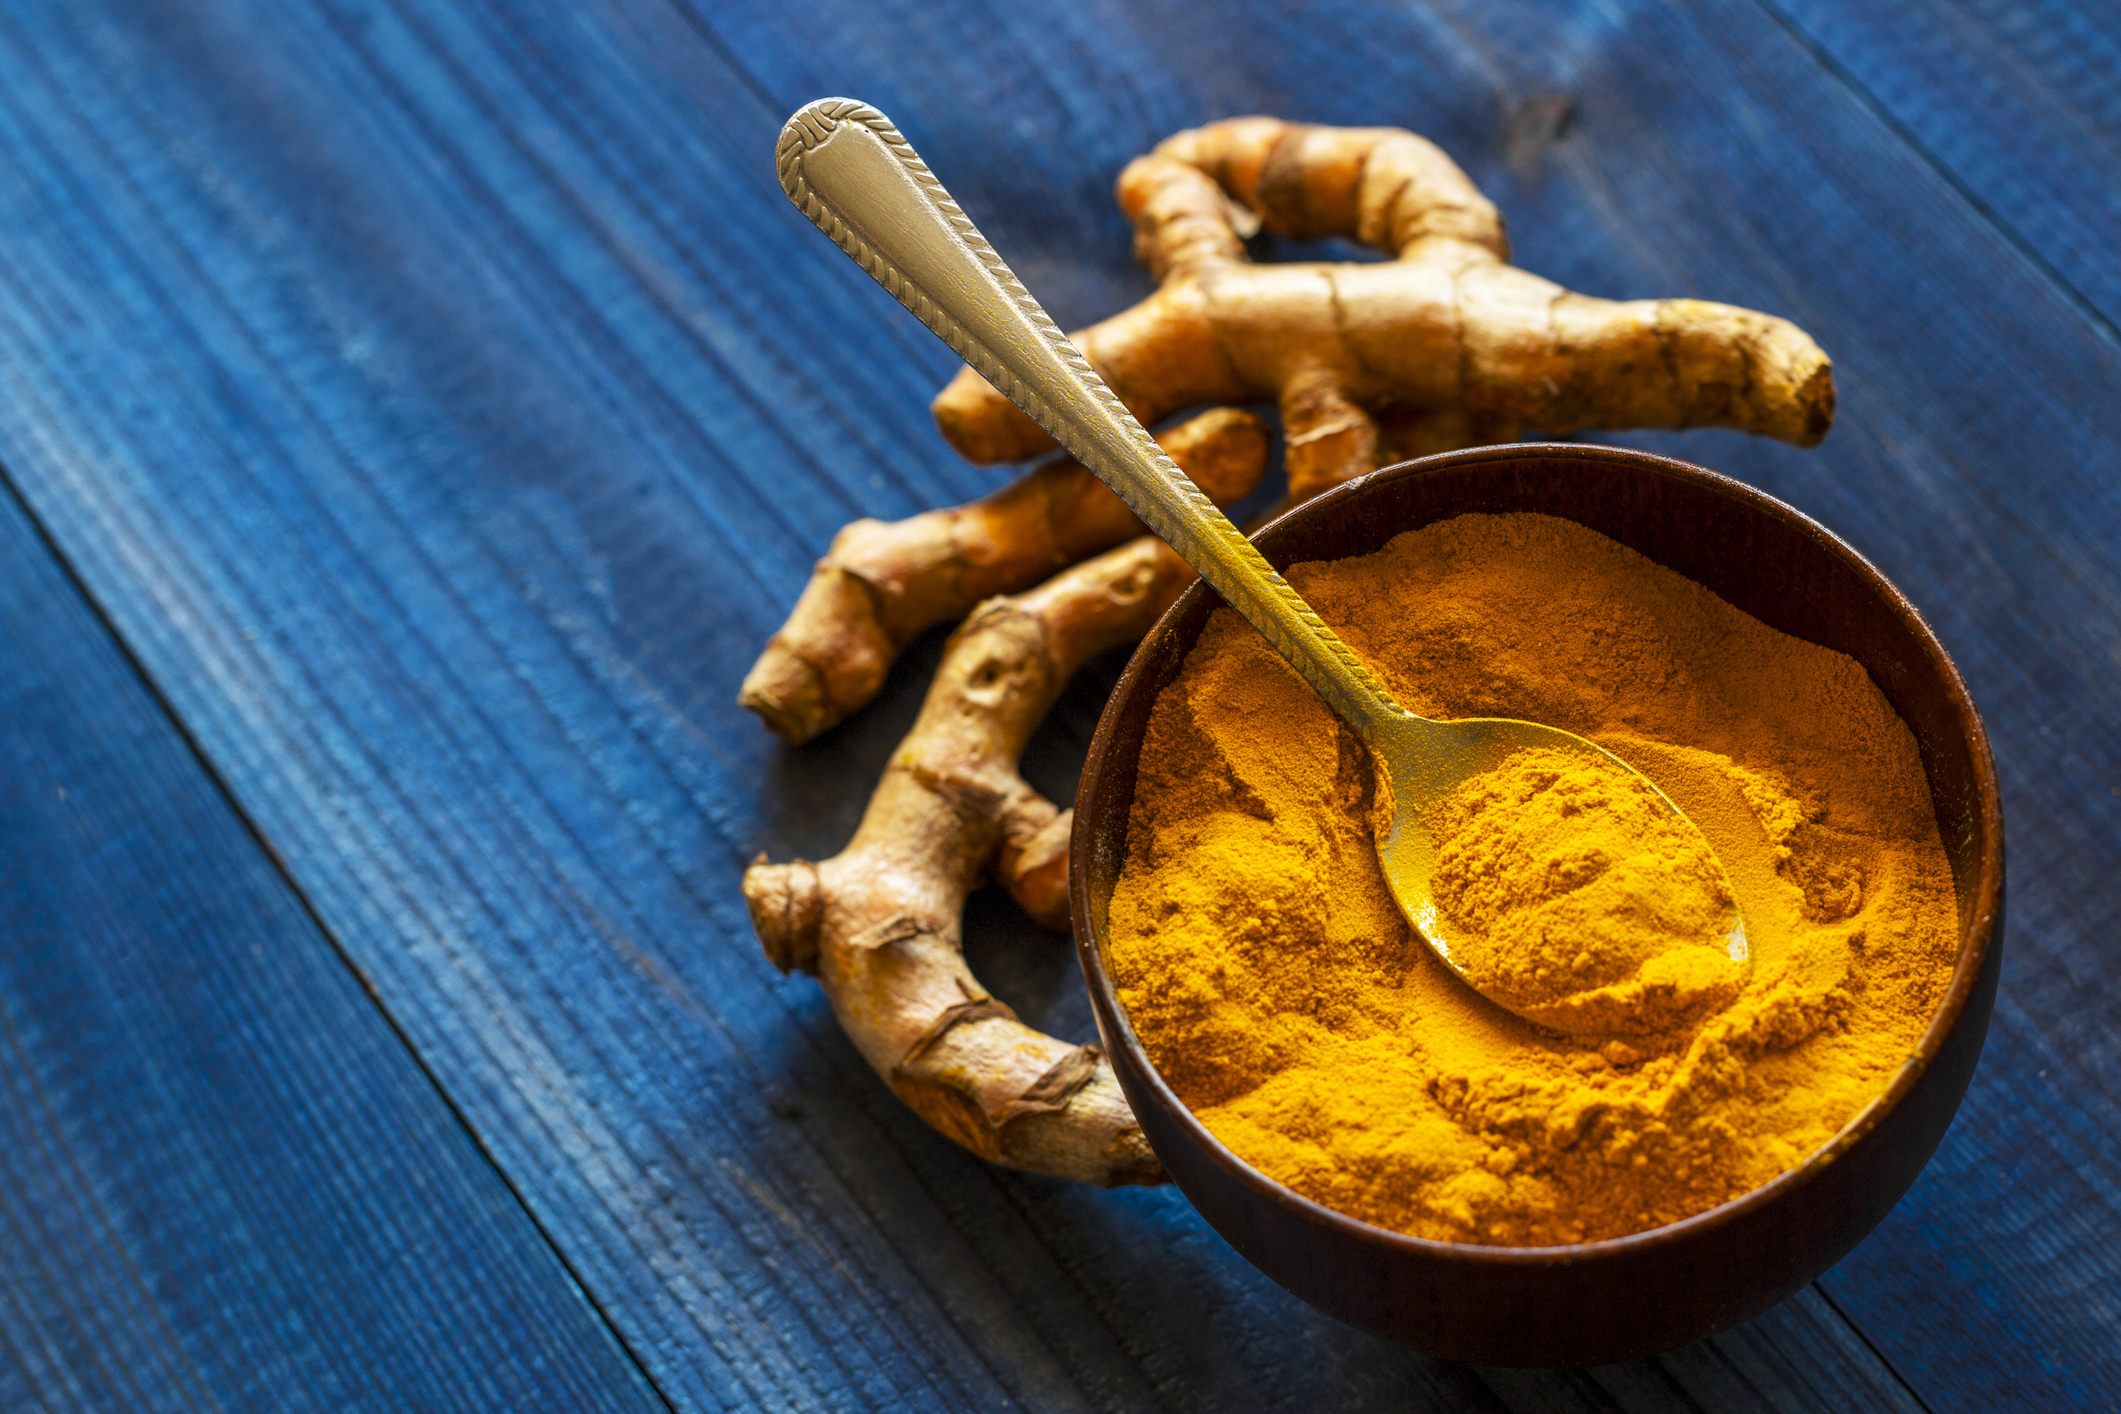 Why research keeps turning to curcumin to fight cancer